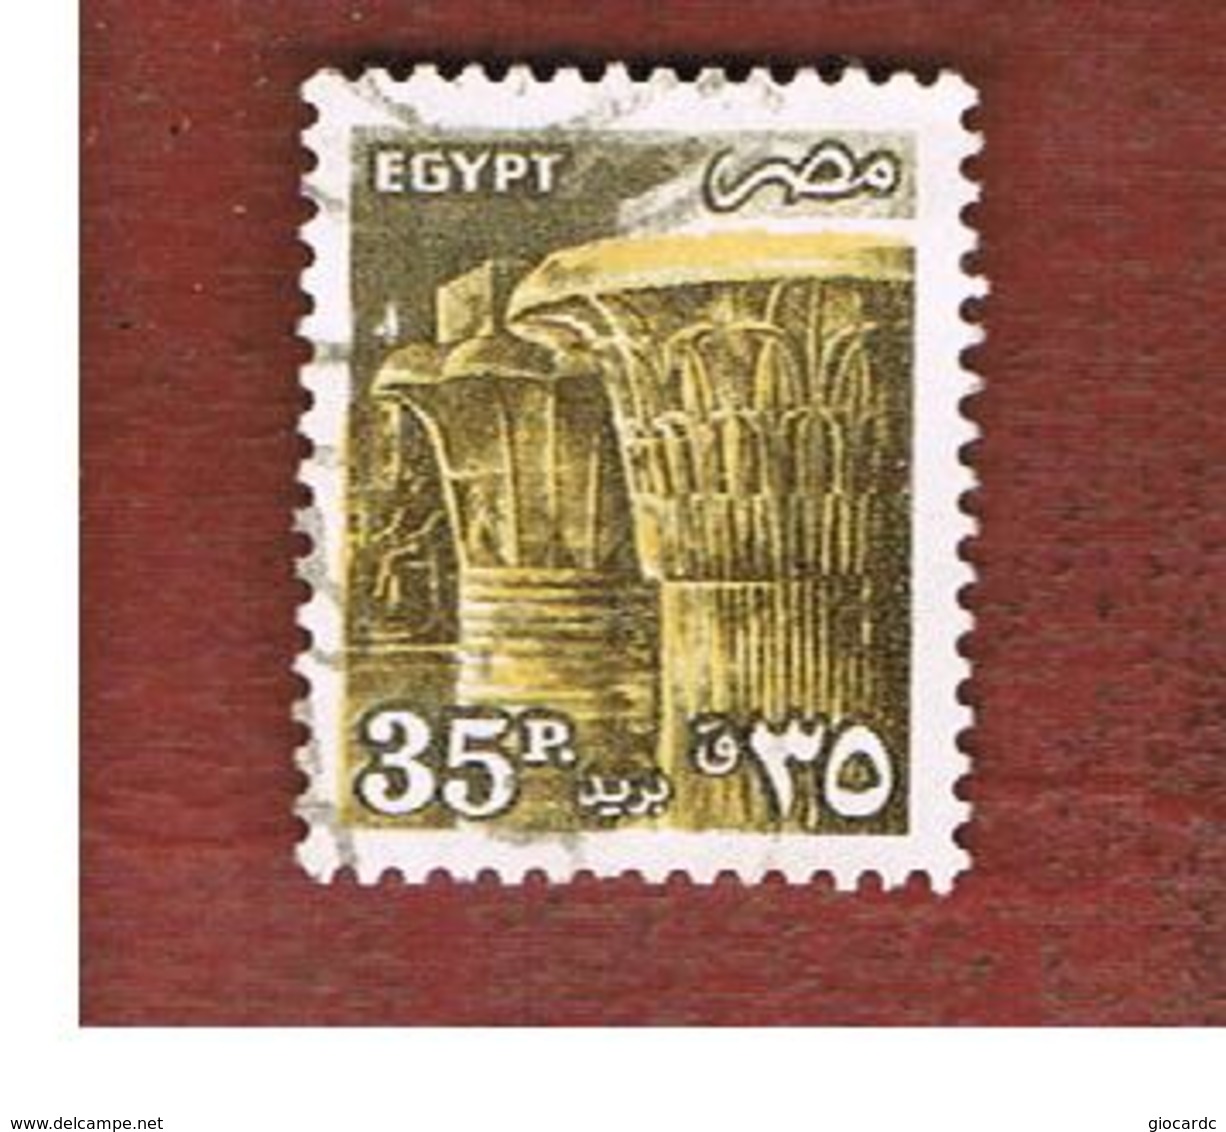 EGITTO (EGYPT) - SG 1586 - 1985  ANCIENT ARTIFACTS: KARNAK TEMPLE  - USED ° - Used Stamps